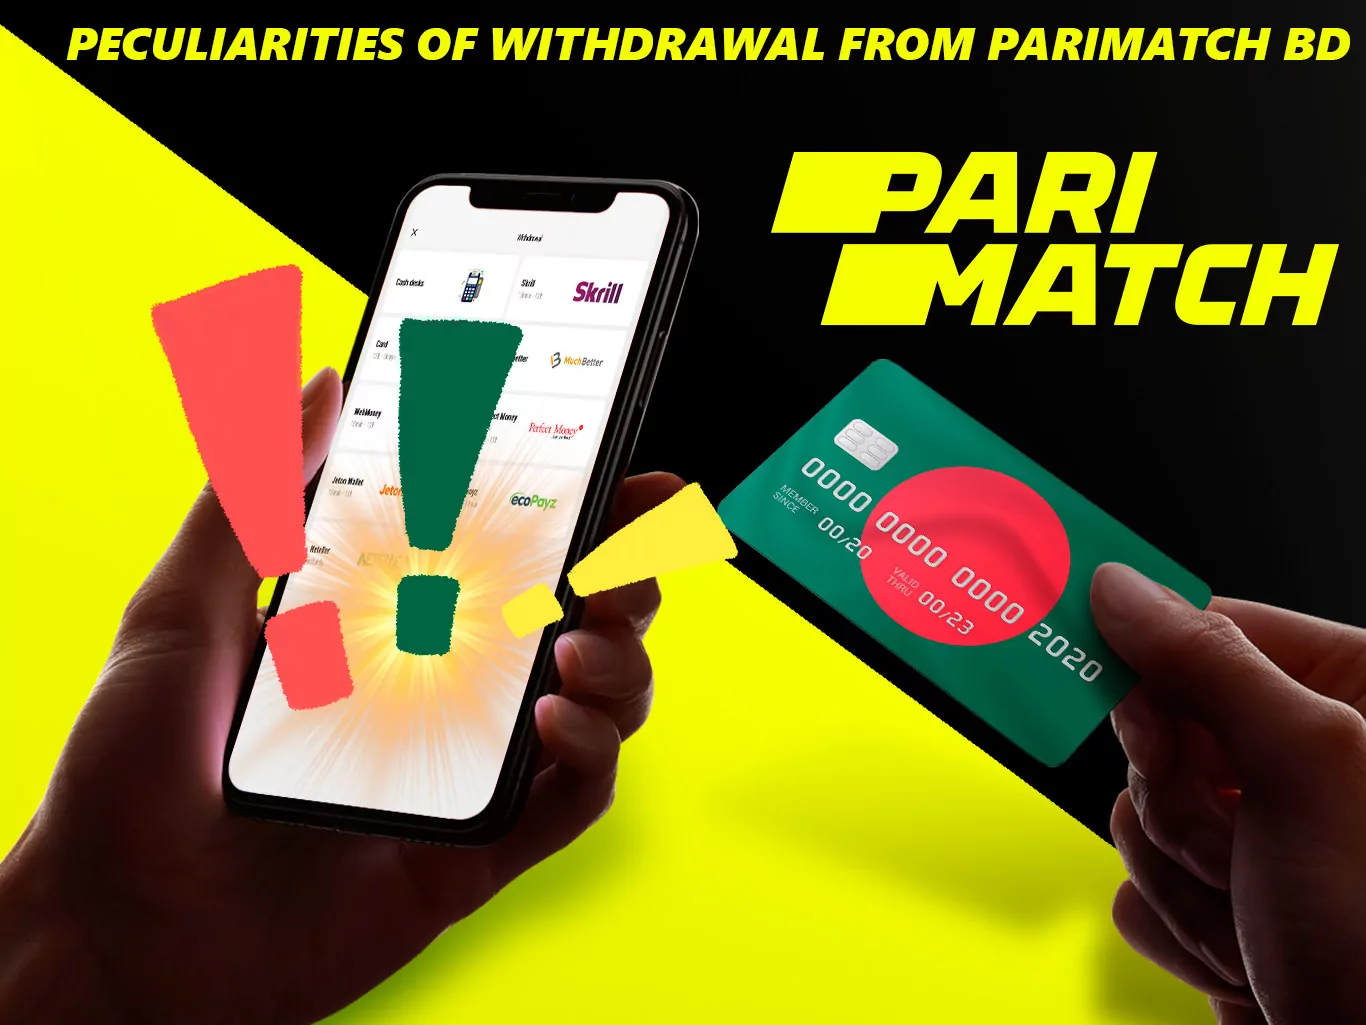 Parimatch has additional withdrawal terms that you need to comply with that help protect your money and also make interaction easier.